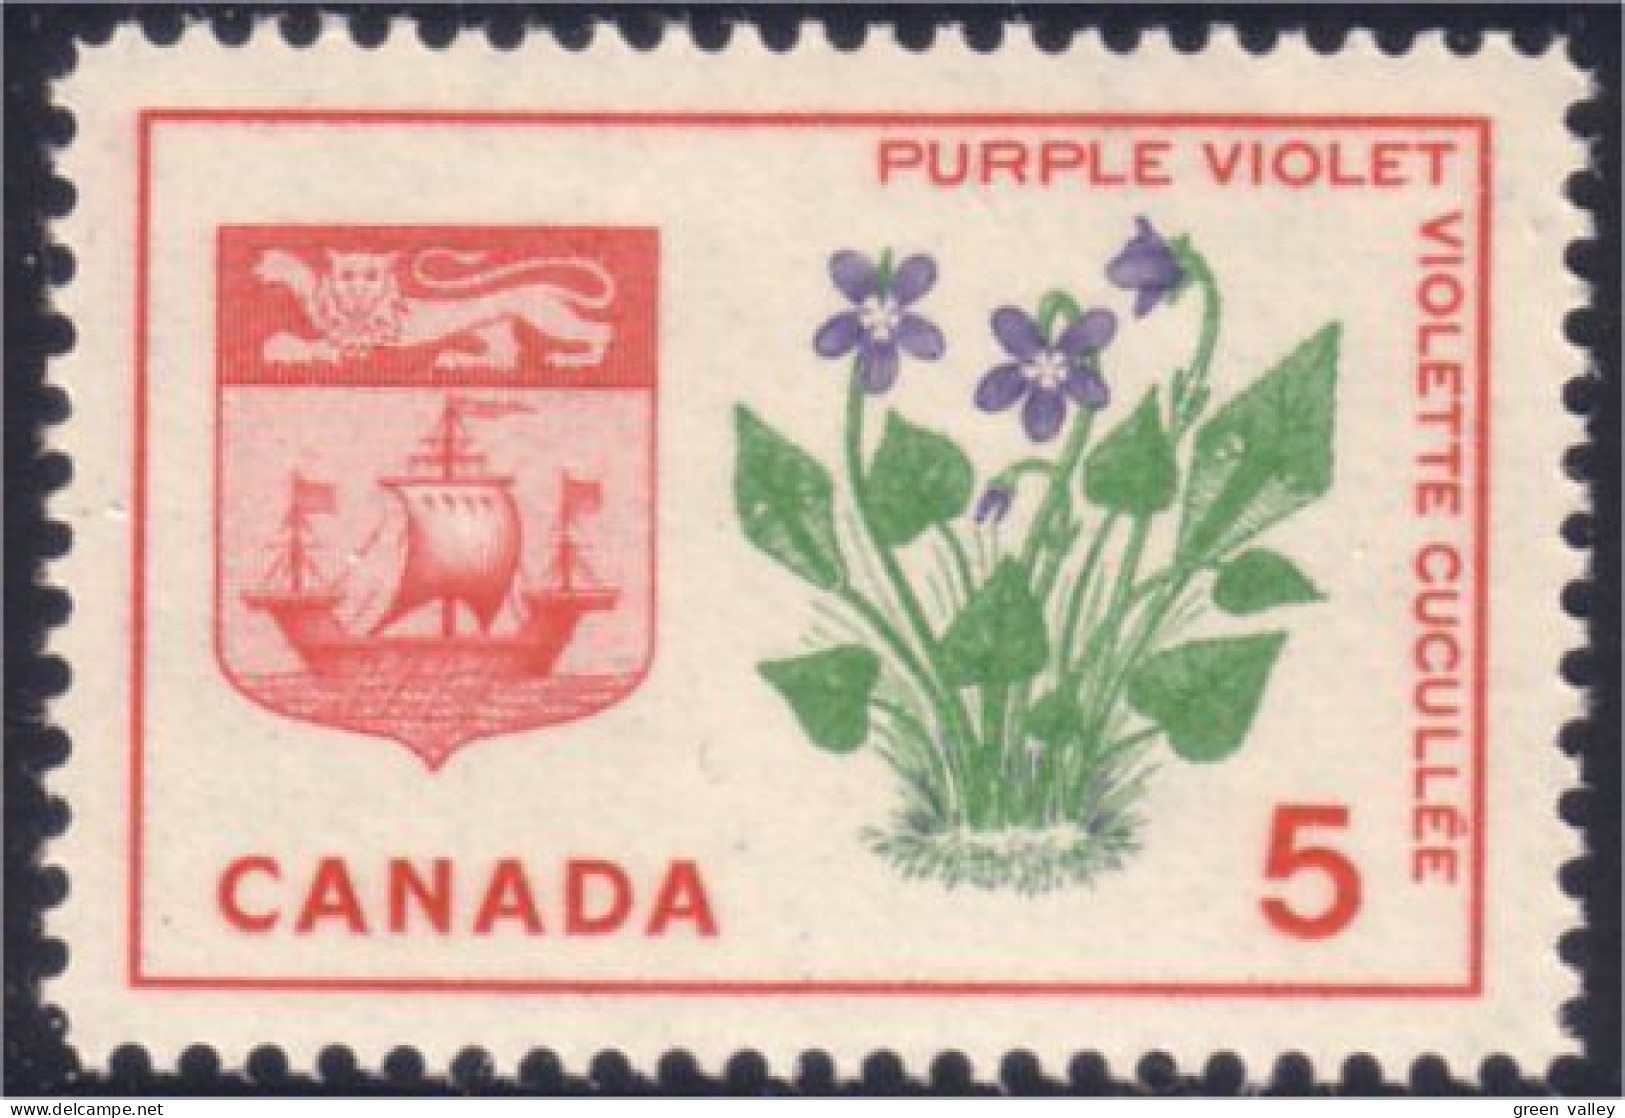 Canada Purple Violet Violette Armoiries Coat Of Arms MNH ** Neuf SC (04-21c) - Timbres